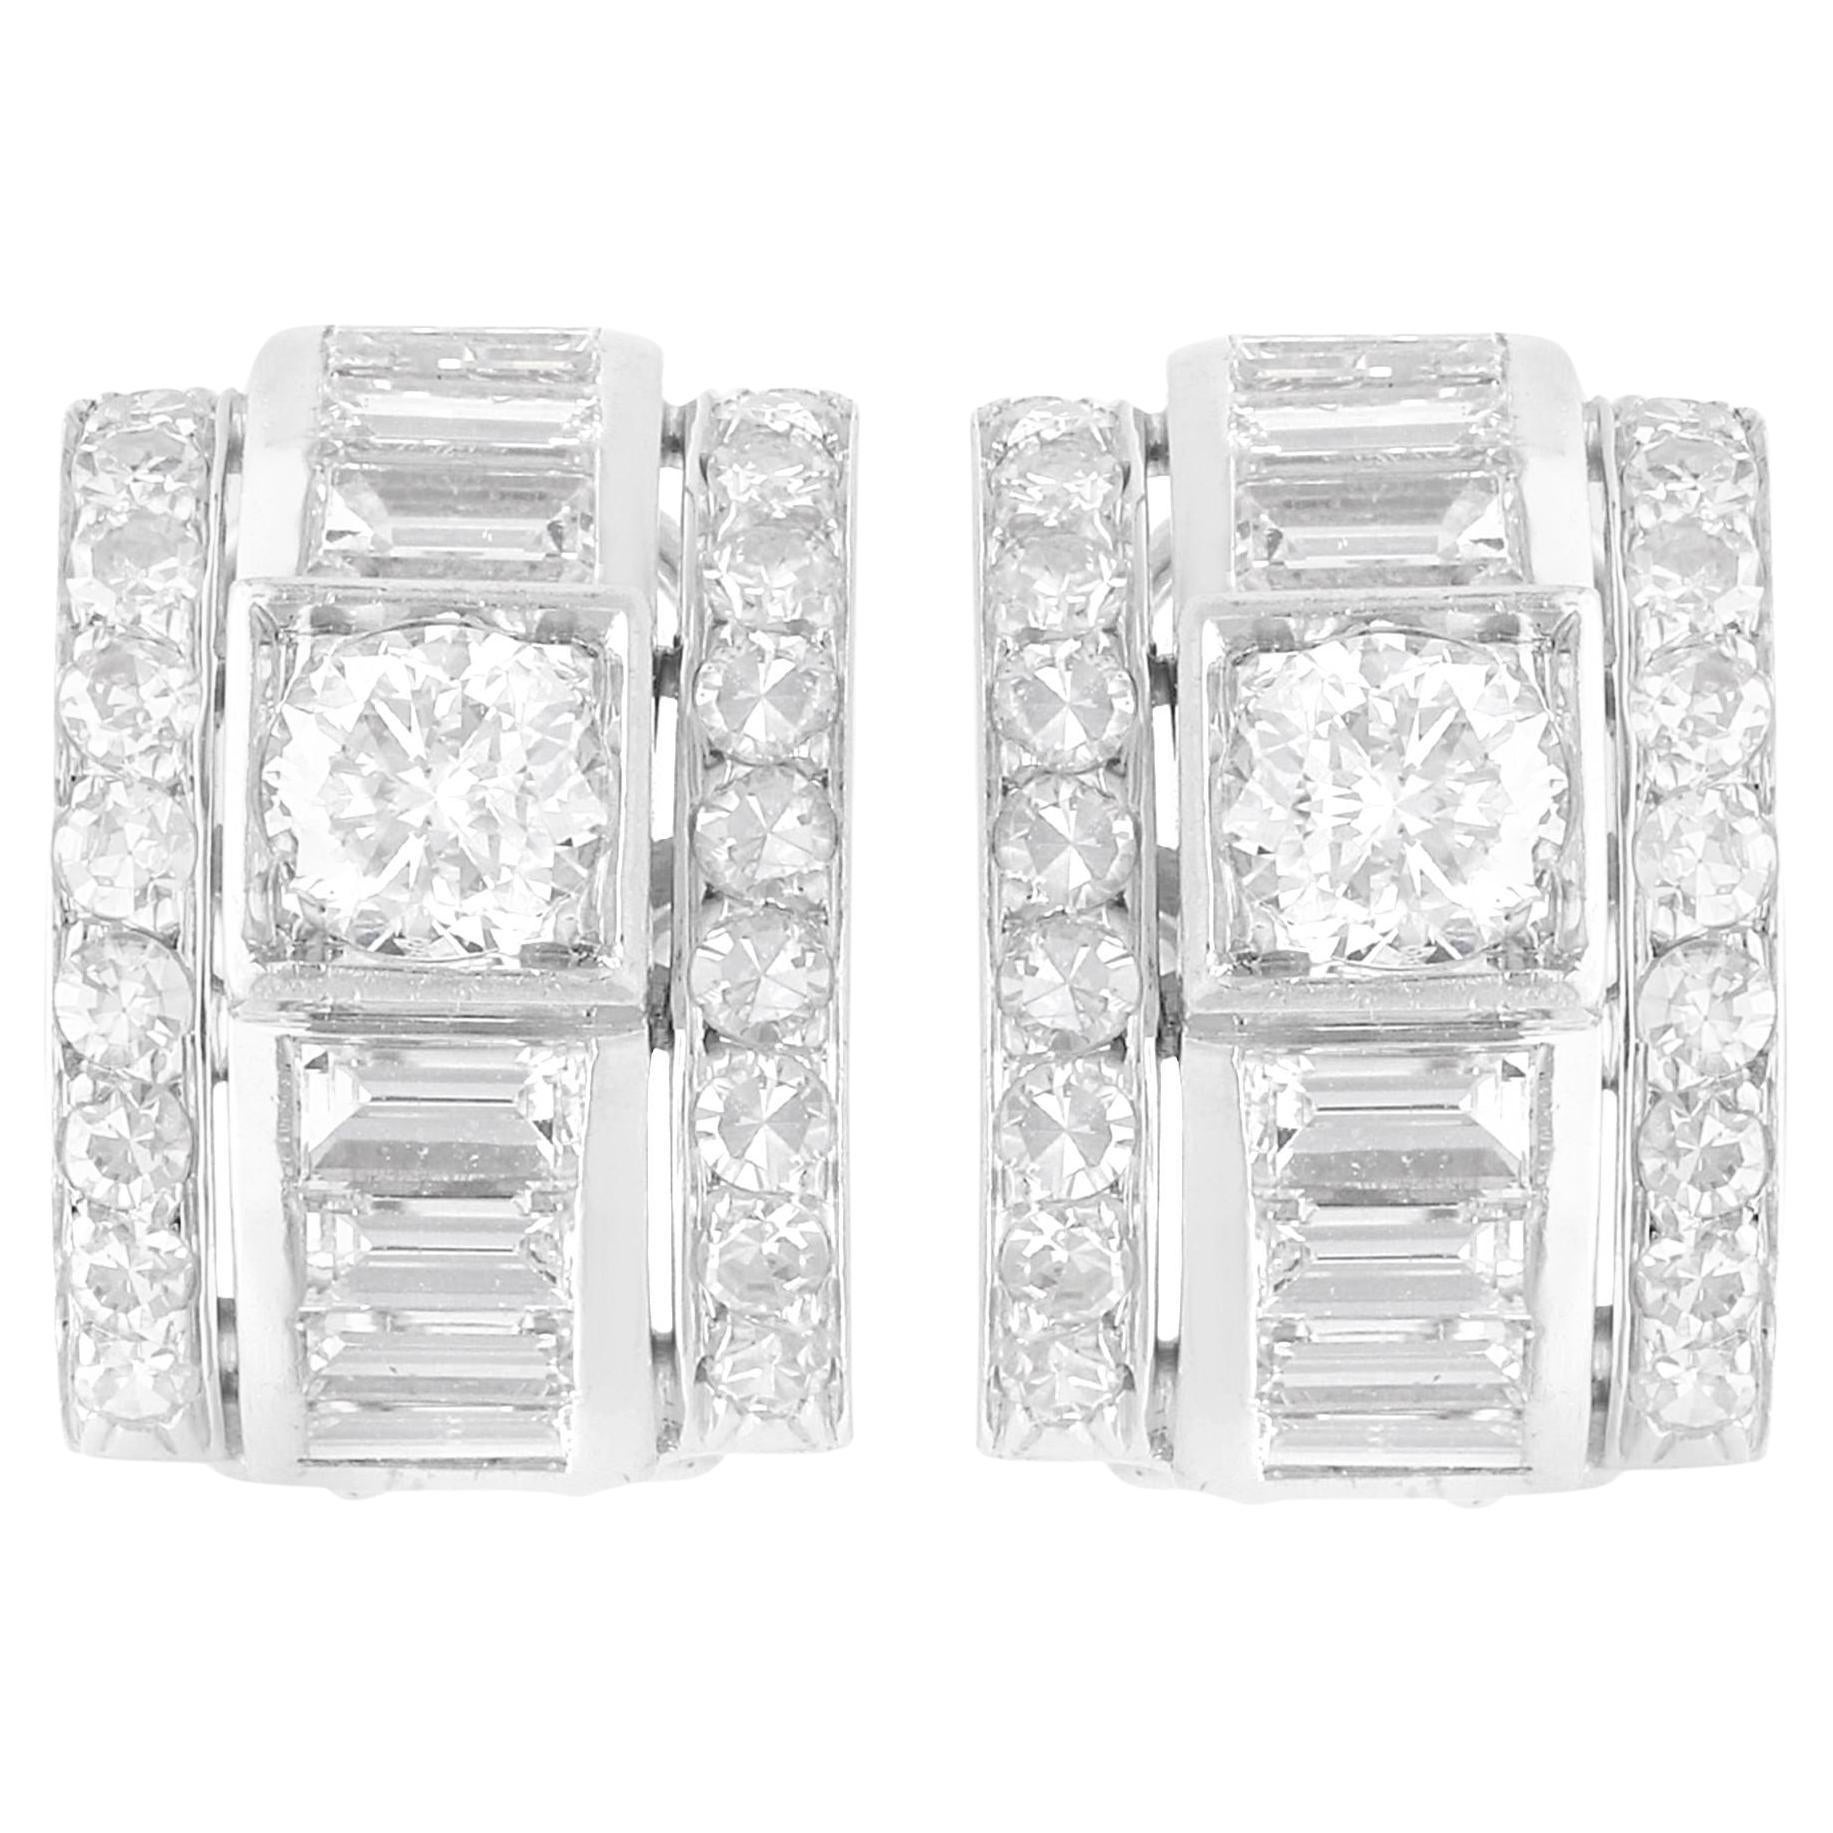 Antique French 2.87 Carat Diamond and White Gold Earrings, Circa 1935 For Sale